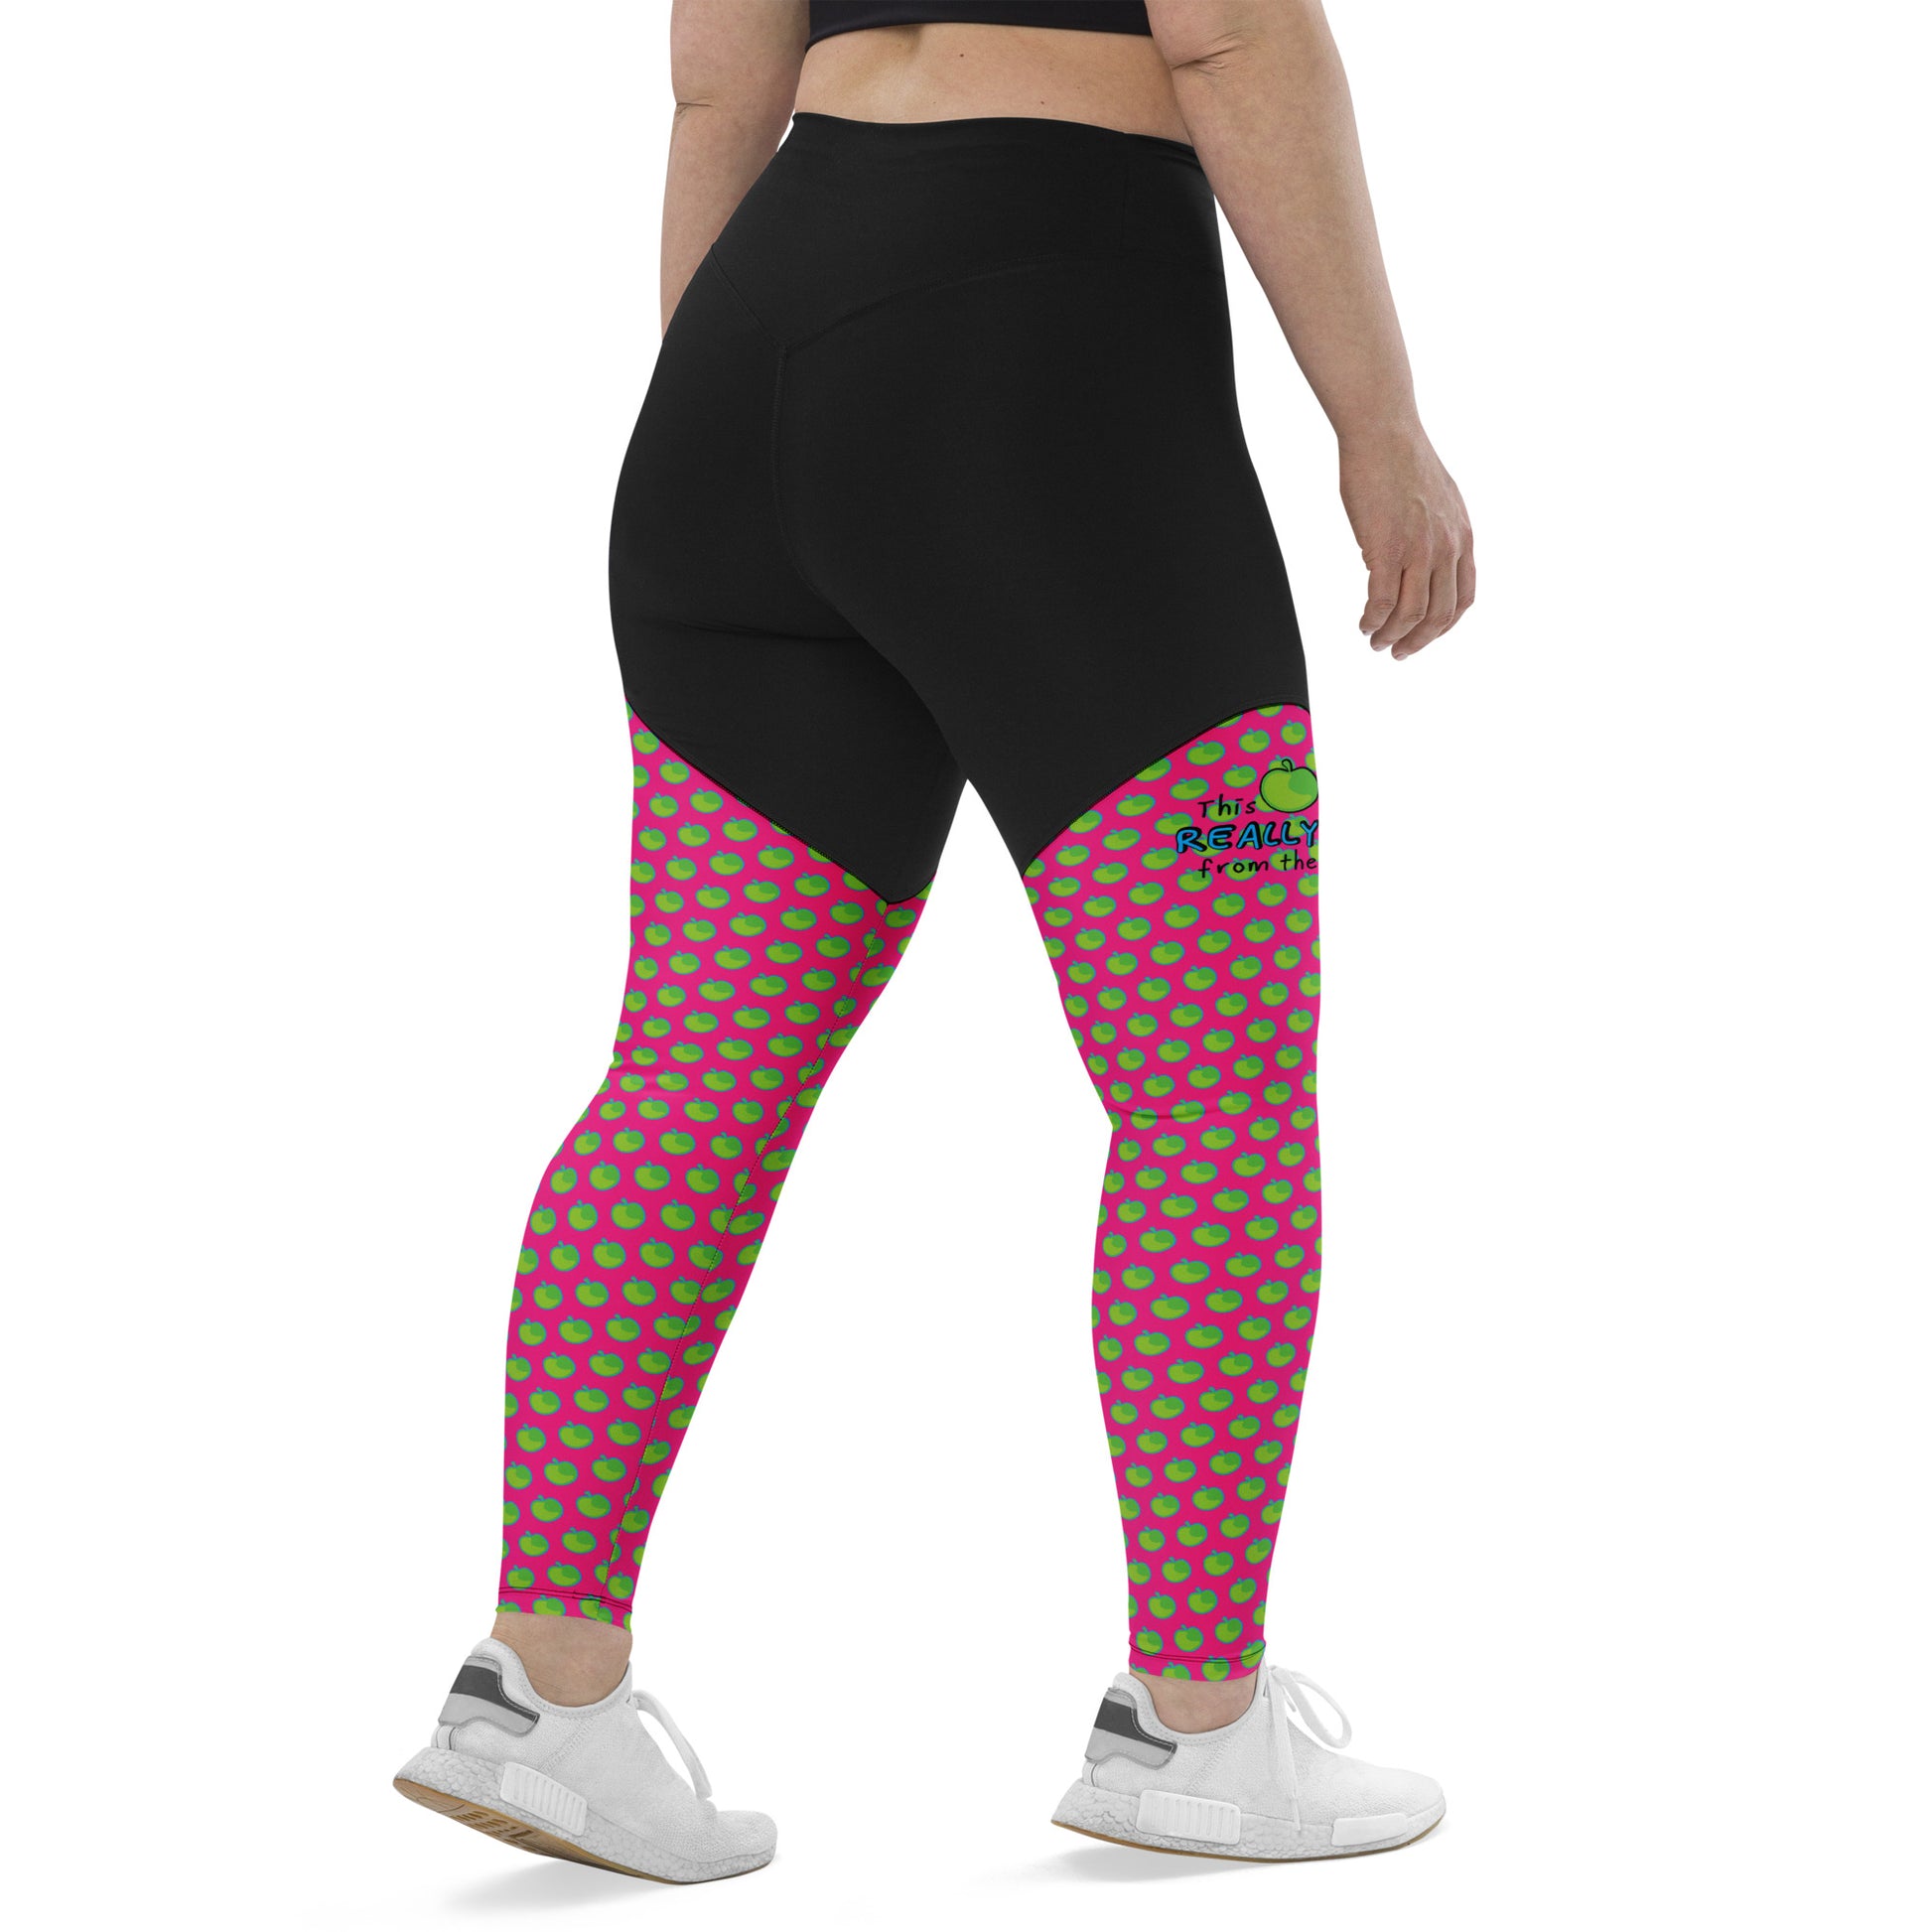 Sports Legging for women with funny meme – PROUD TO BE ME fashion